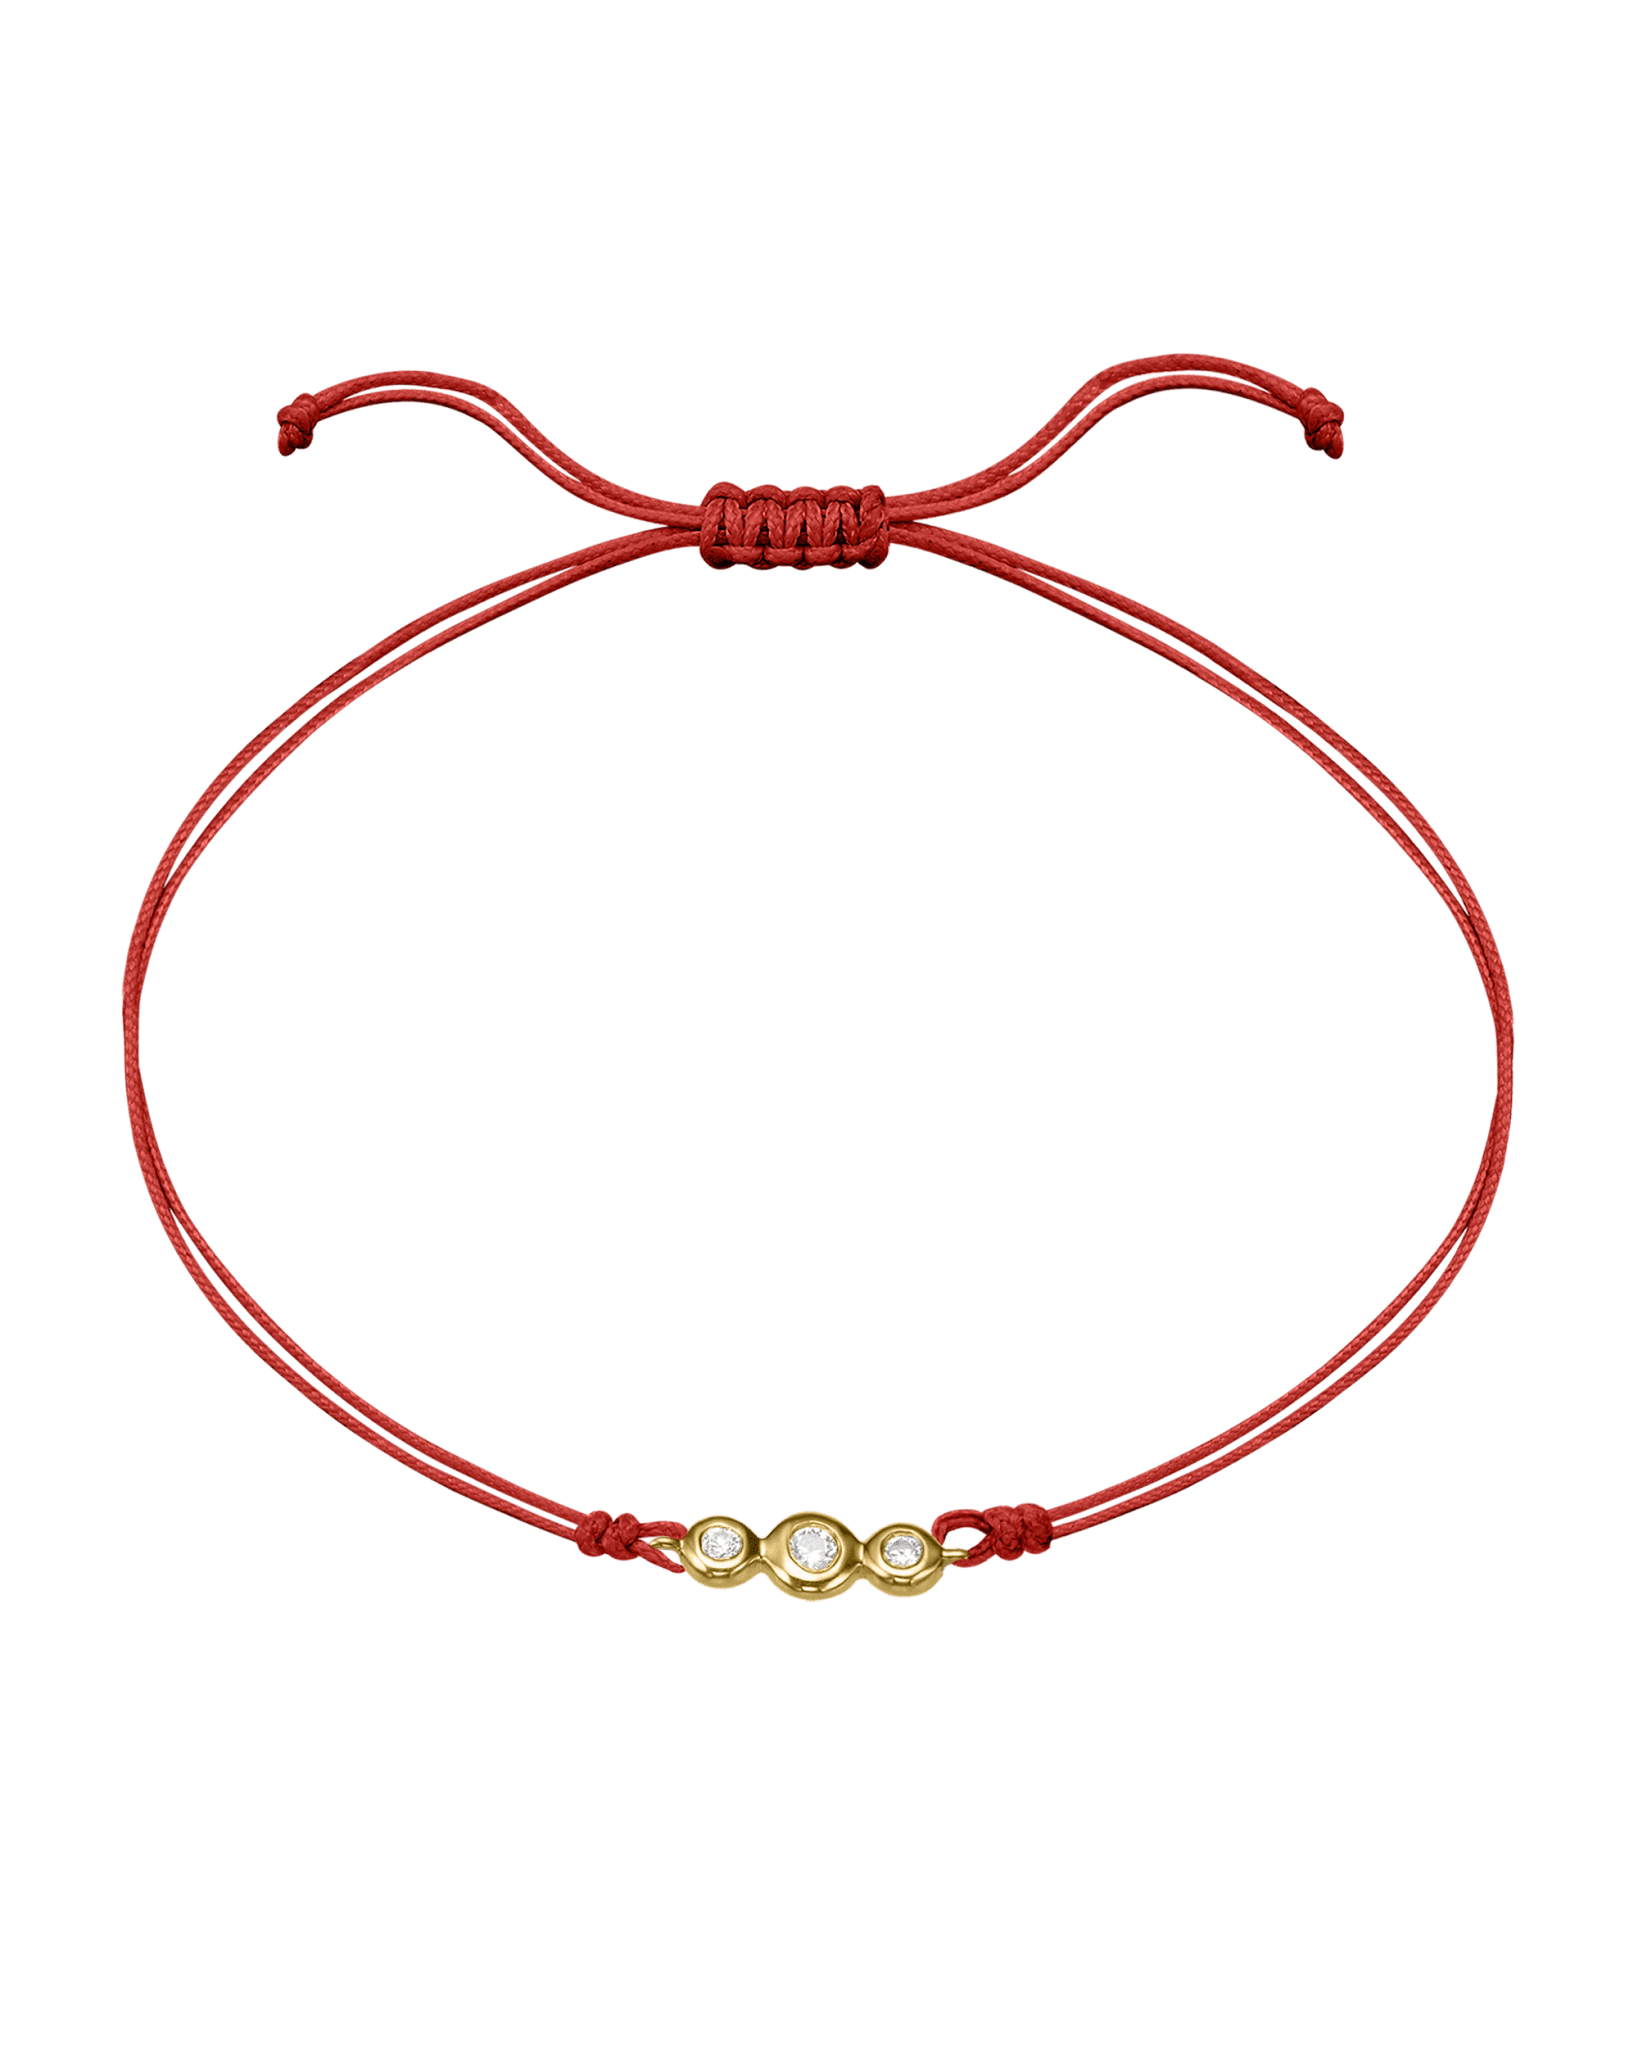 The Three of Us Diamond String of love - 14K Yellow Gold Bracelet 14K Solid Gold Red 